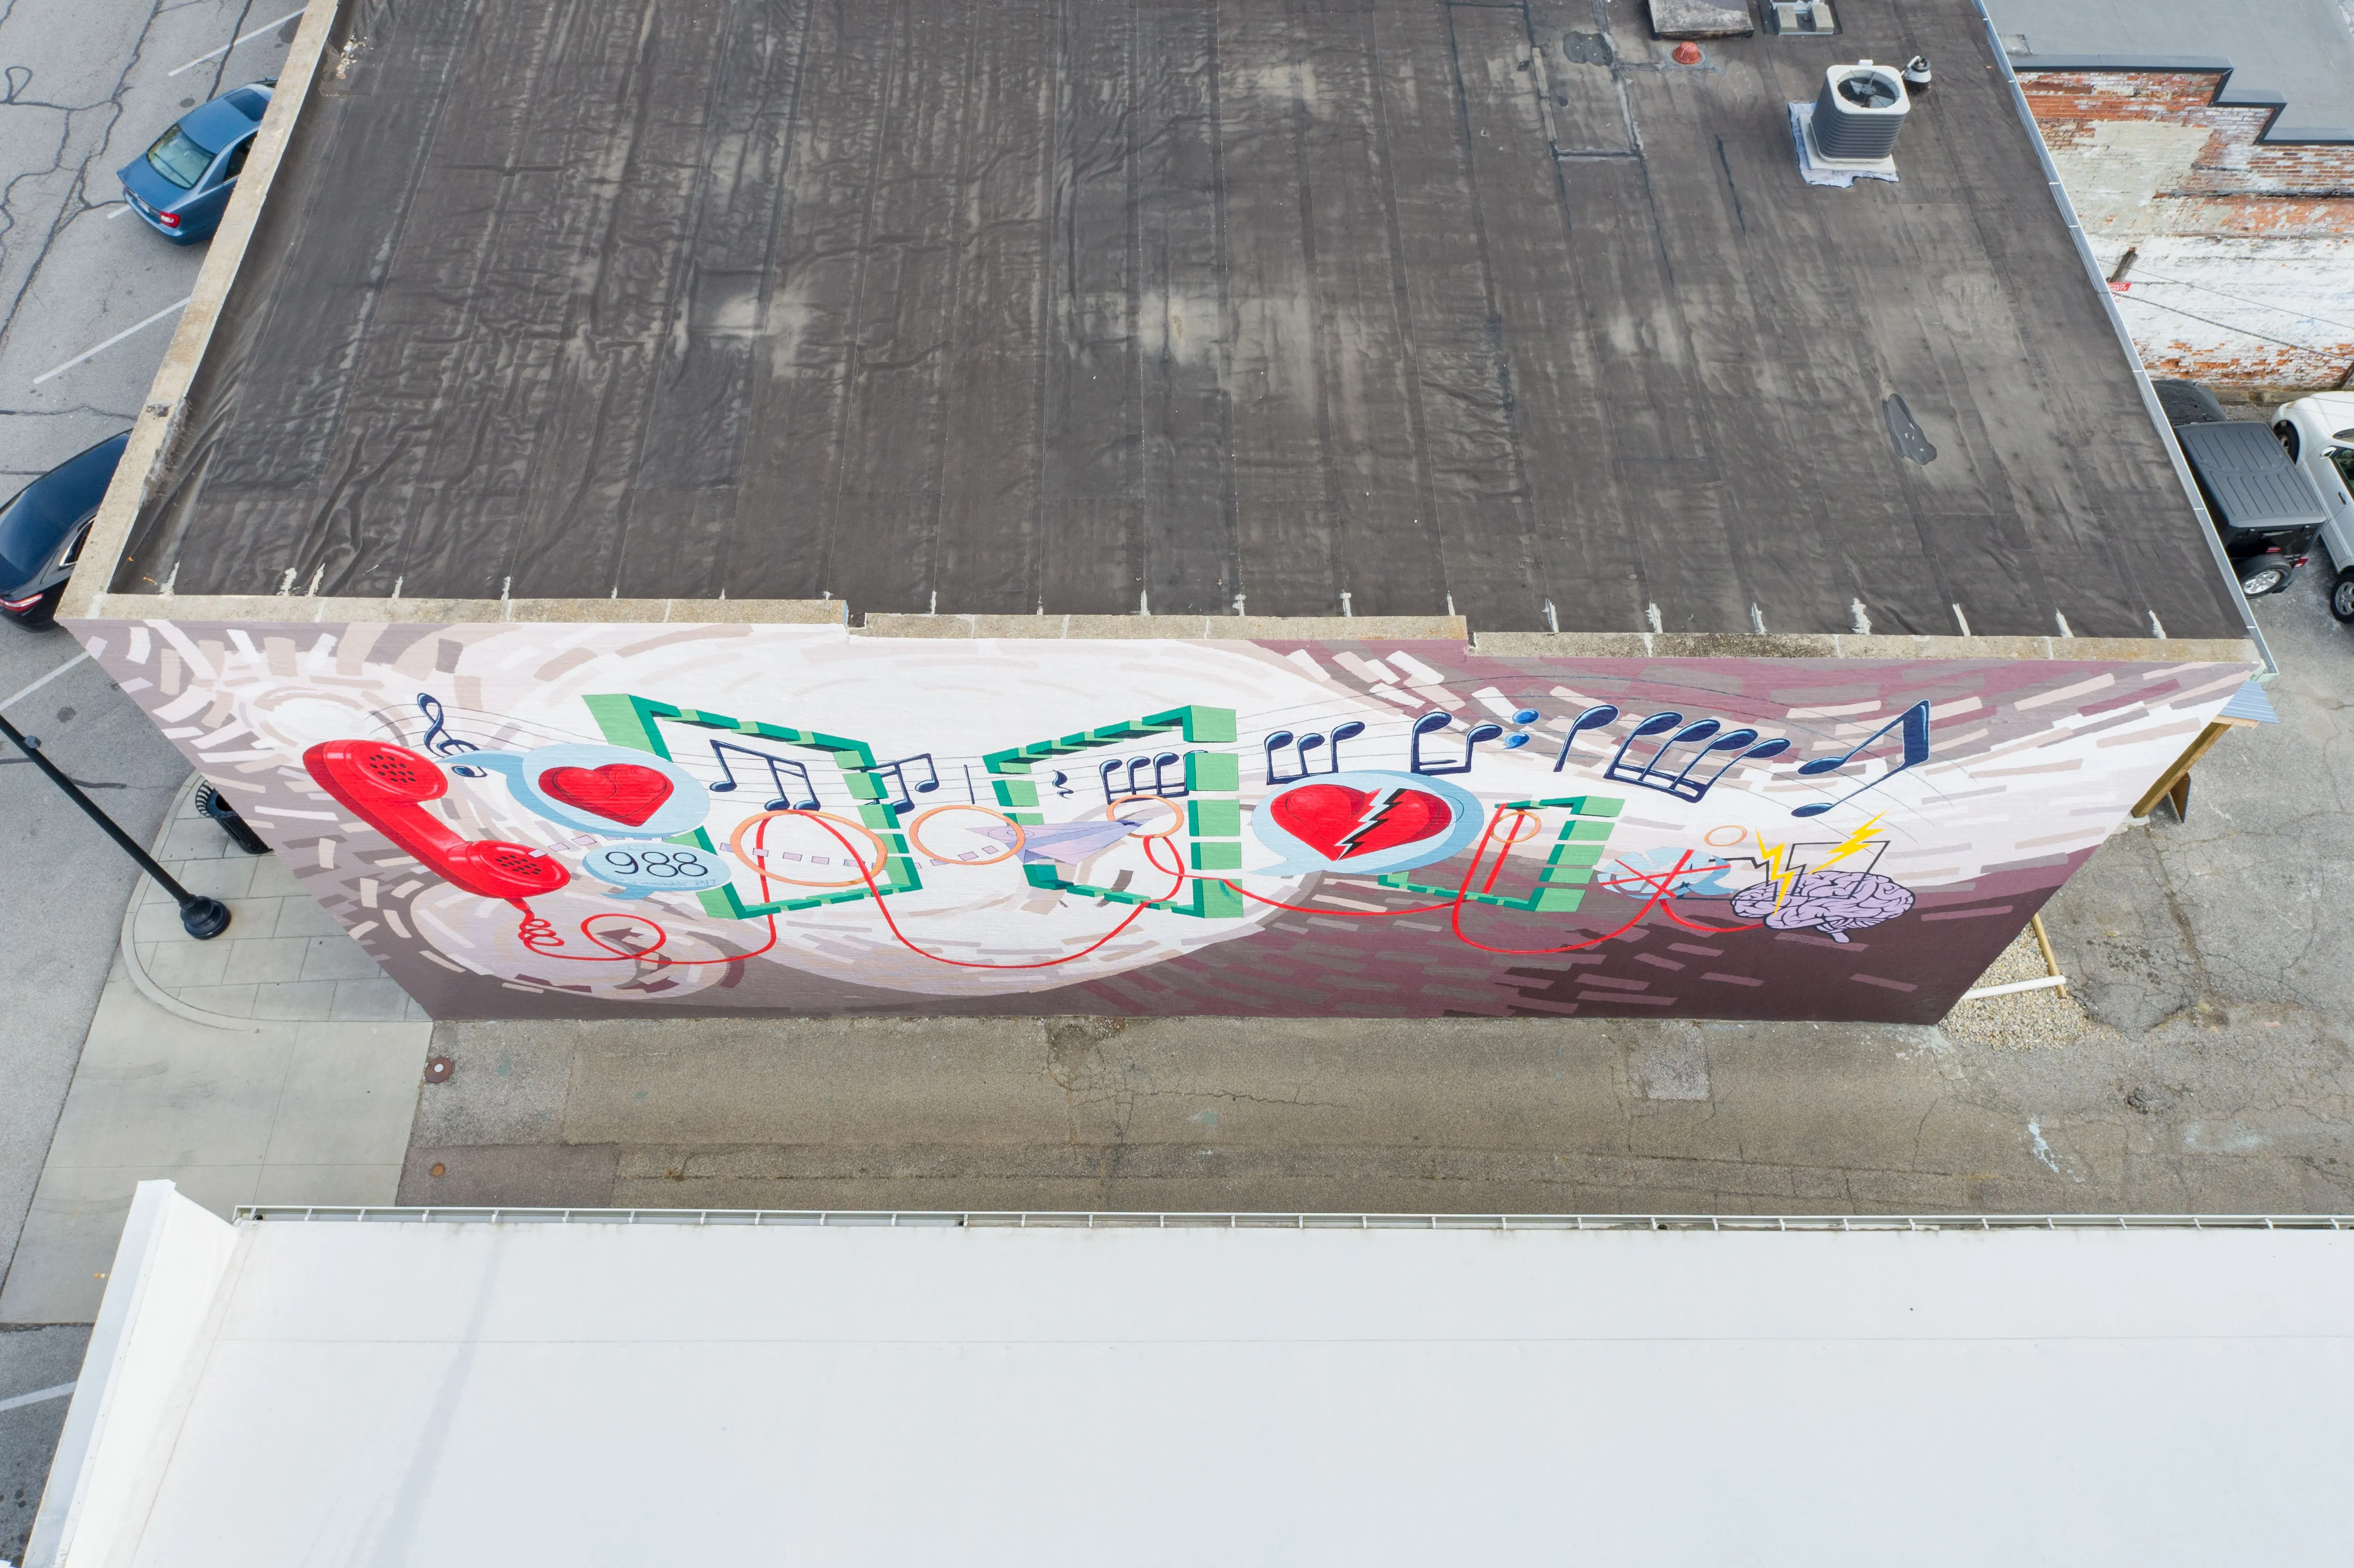 Aerial view of a building with a colorful mural on its rooftop featuring hearts and geometric patterns.